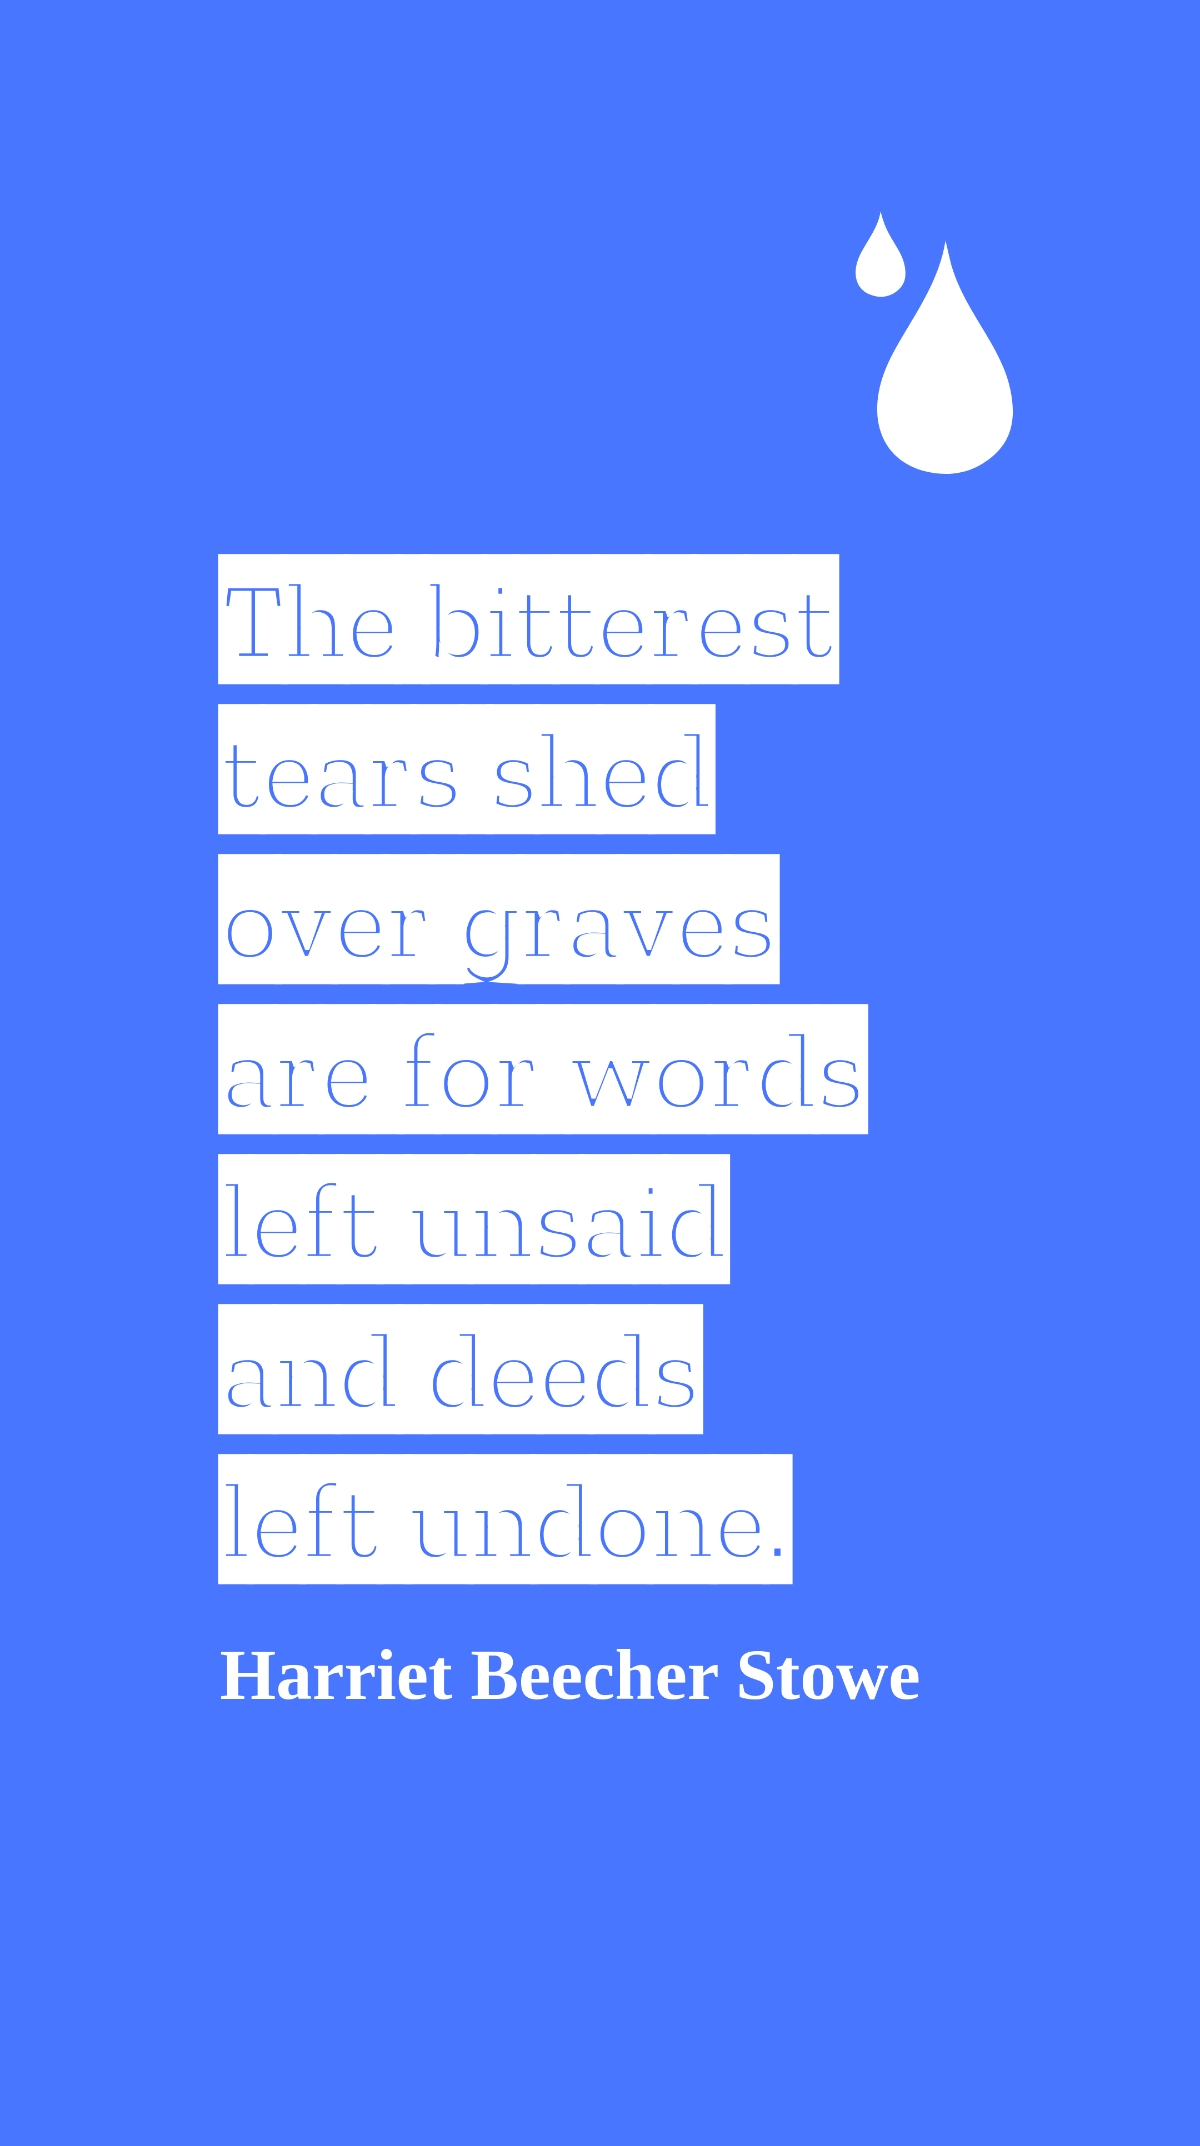 Harriet Beecher Stowe - The bitterest tears shed over graves are for words left unsaid and deeds left undone.